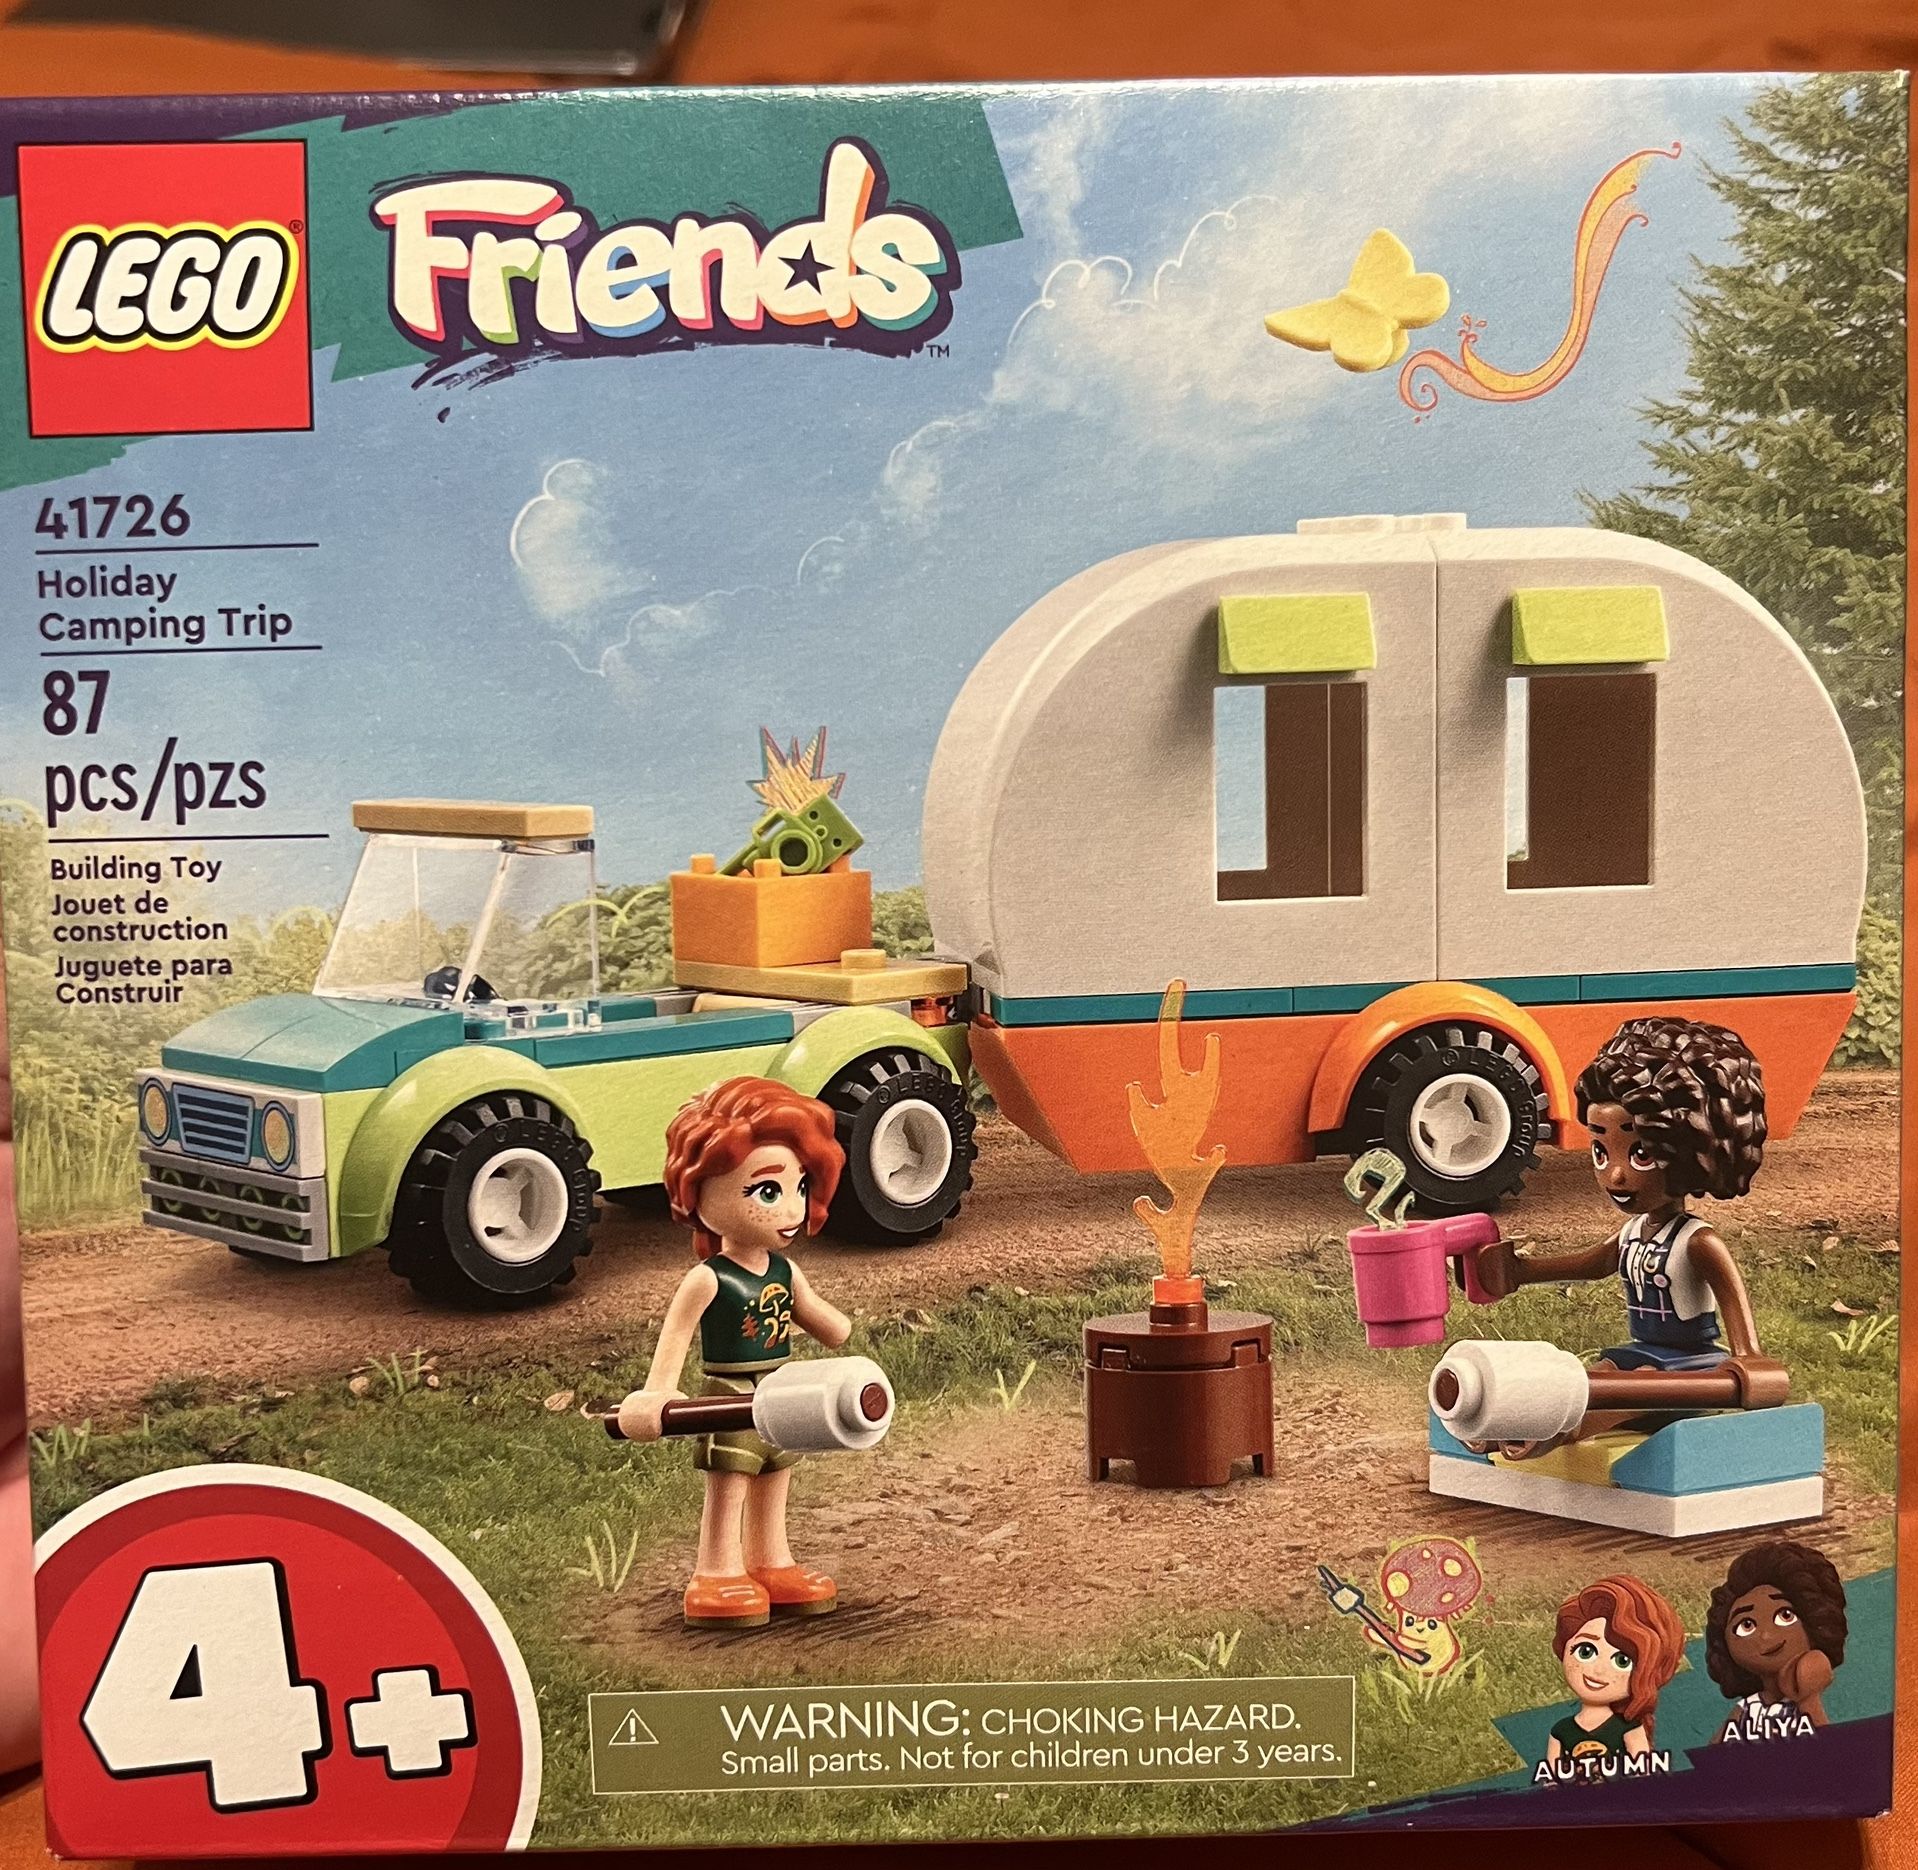 LEGO Friends Holiday Camping Trip 